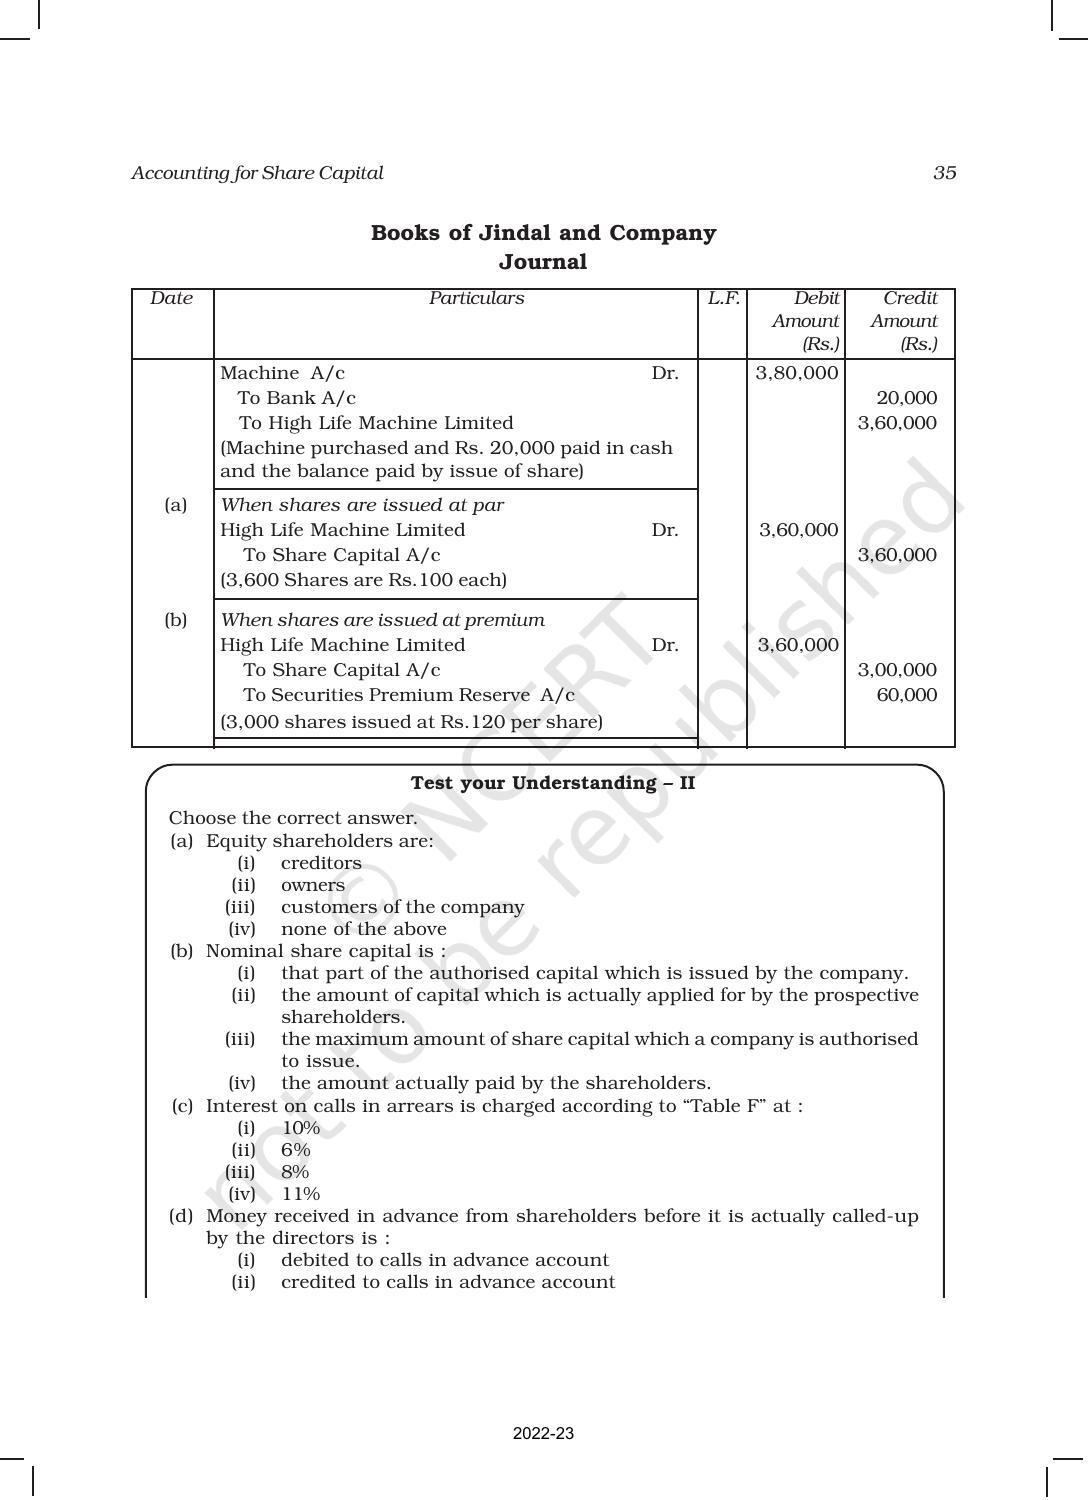 NCERT Book for Class 12 Accountancy Part II Chapter 1 Accounting for Share Capital - Page 35